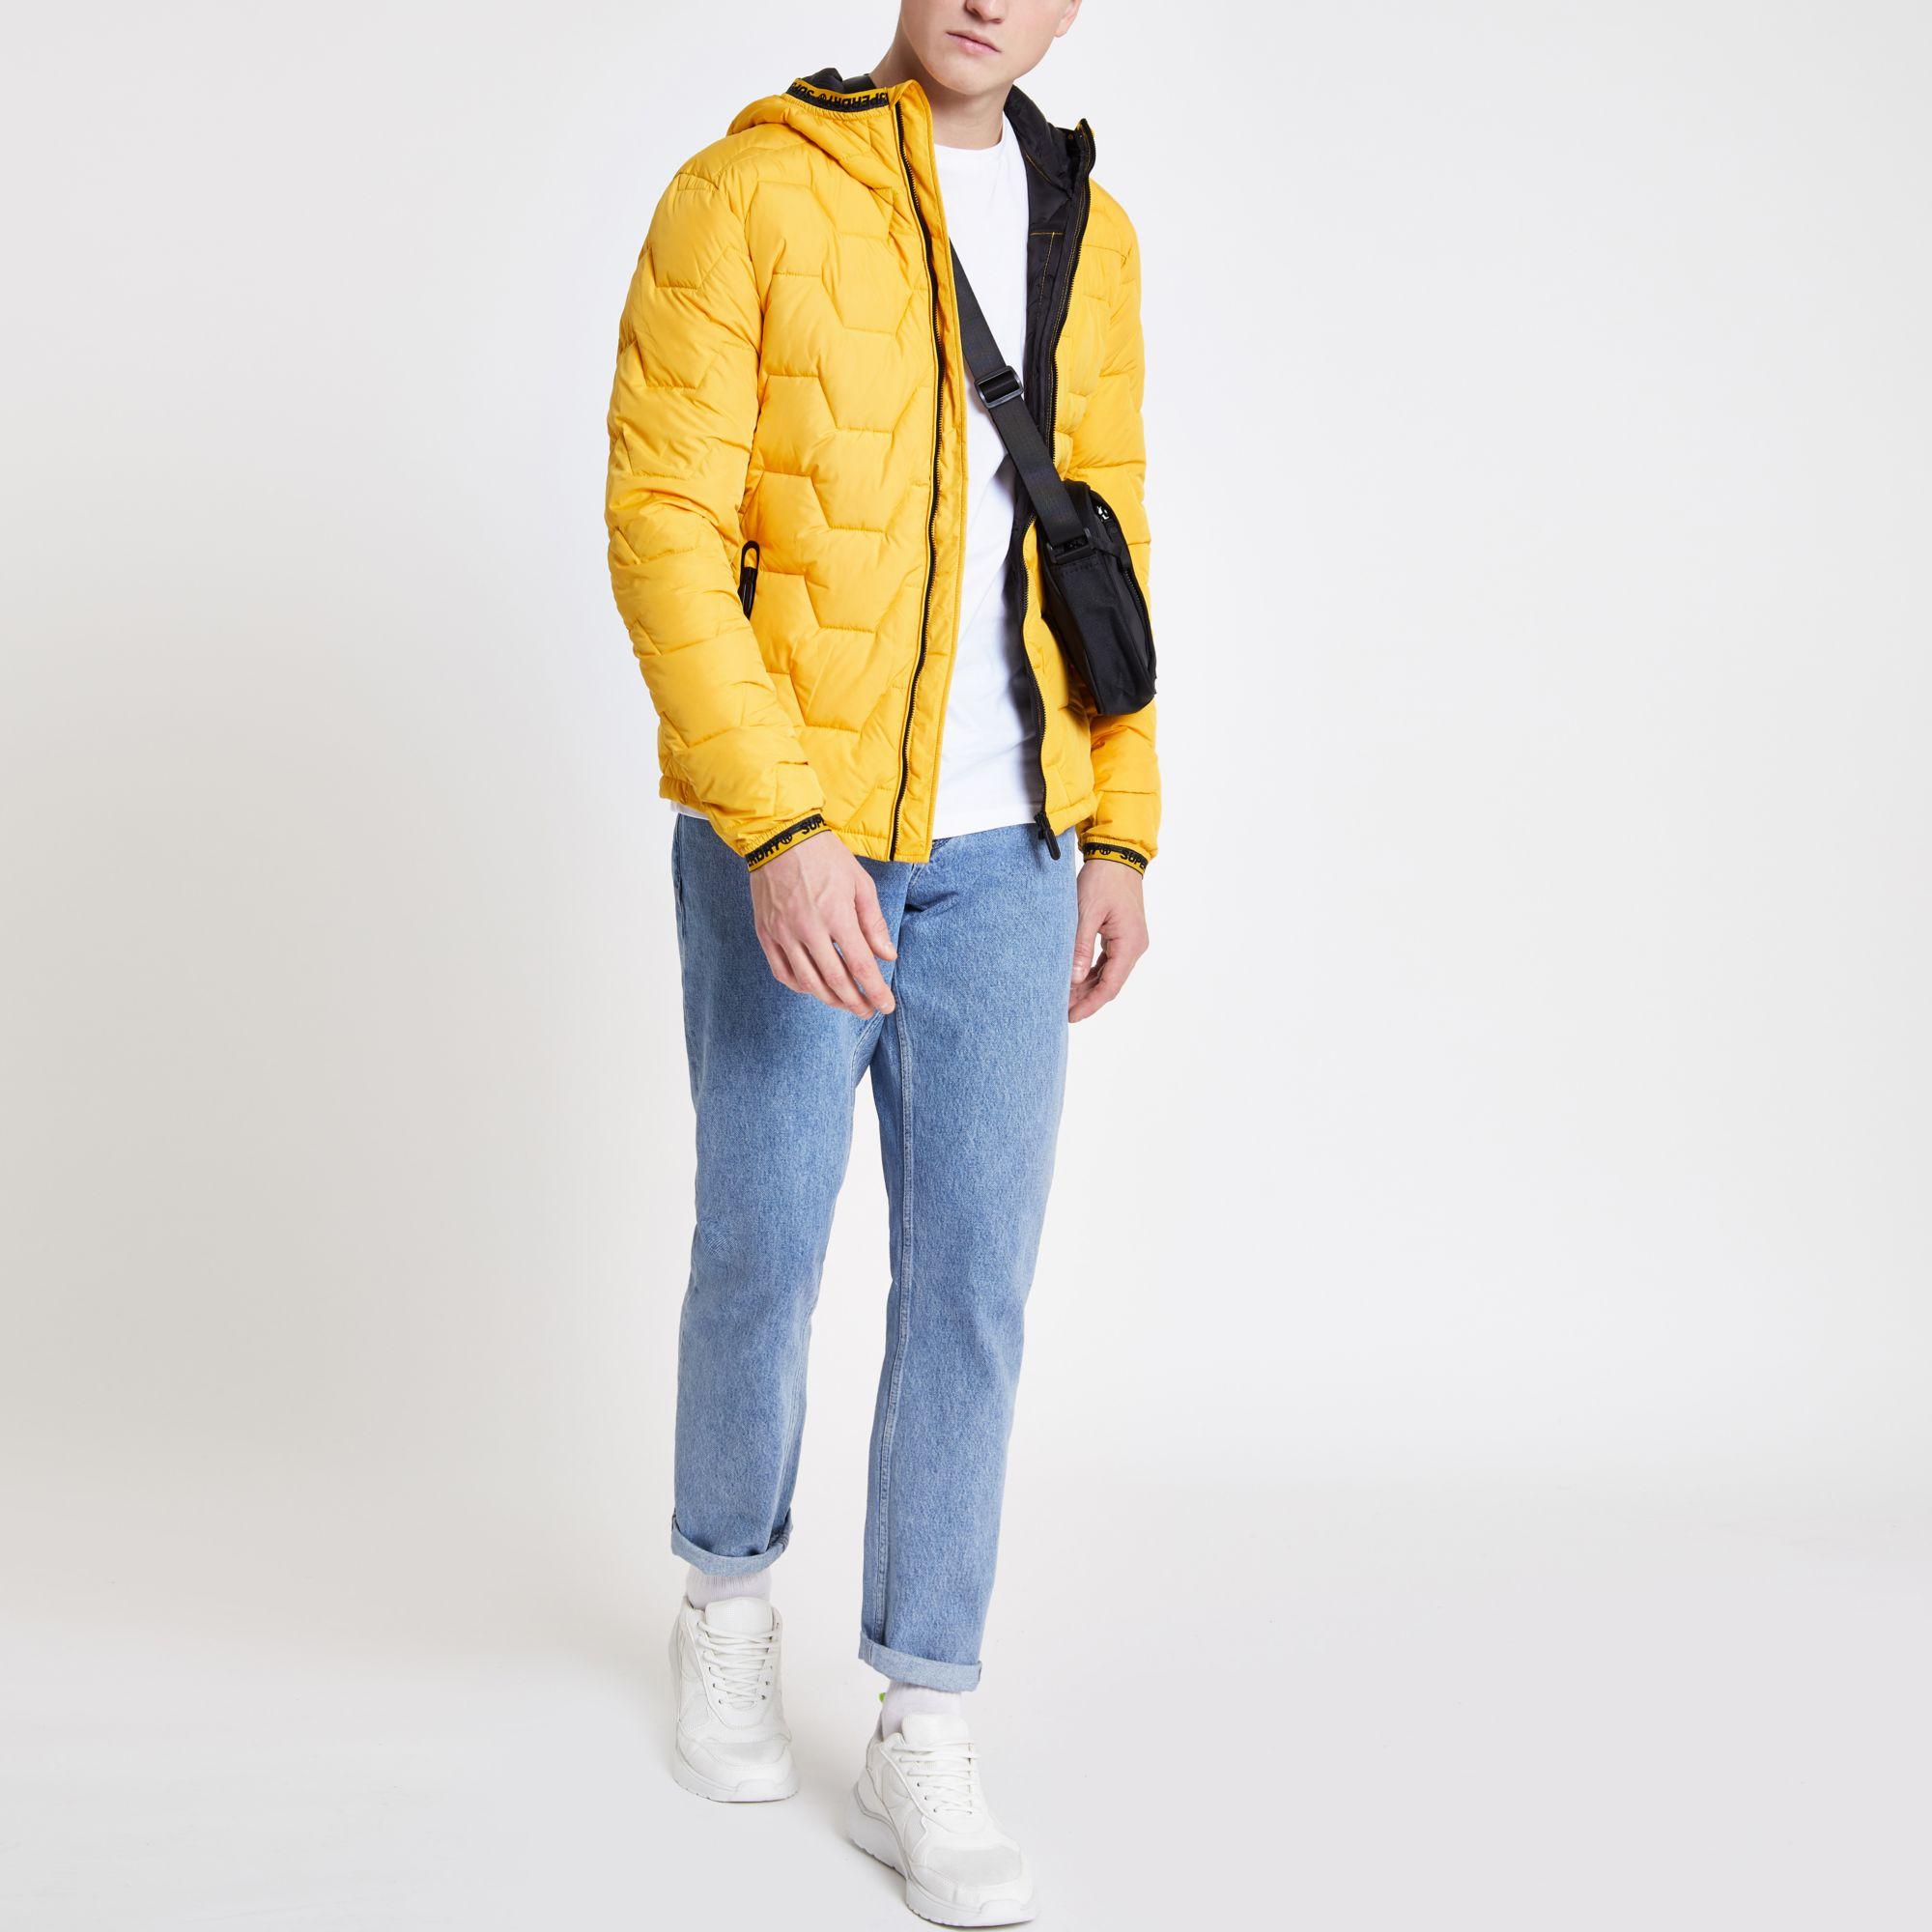 River Island Superdry Yellow Quilted Puffer Jacket for Men - Lyst